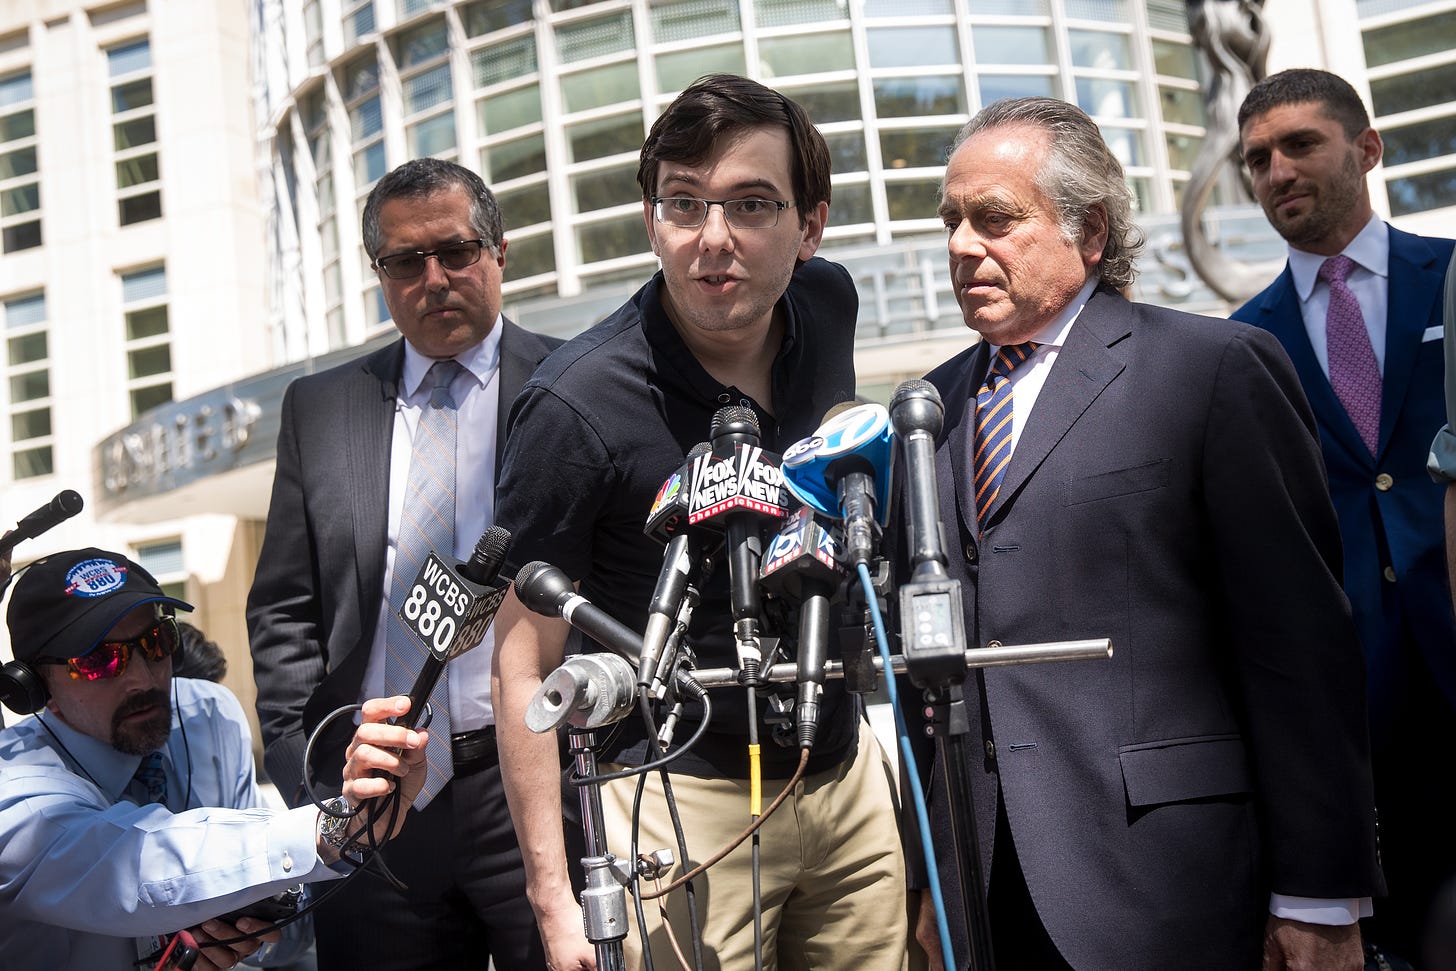 Martin Shkreli speaking to the press after his conviction. He is standing between lawyer Marc Agnifilo (right) and Benjamin Brafman (left). Defense lawyer Jacob Kaplan is standing behind Brafman. (Getty Images.)